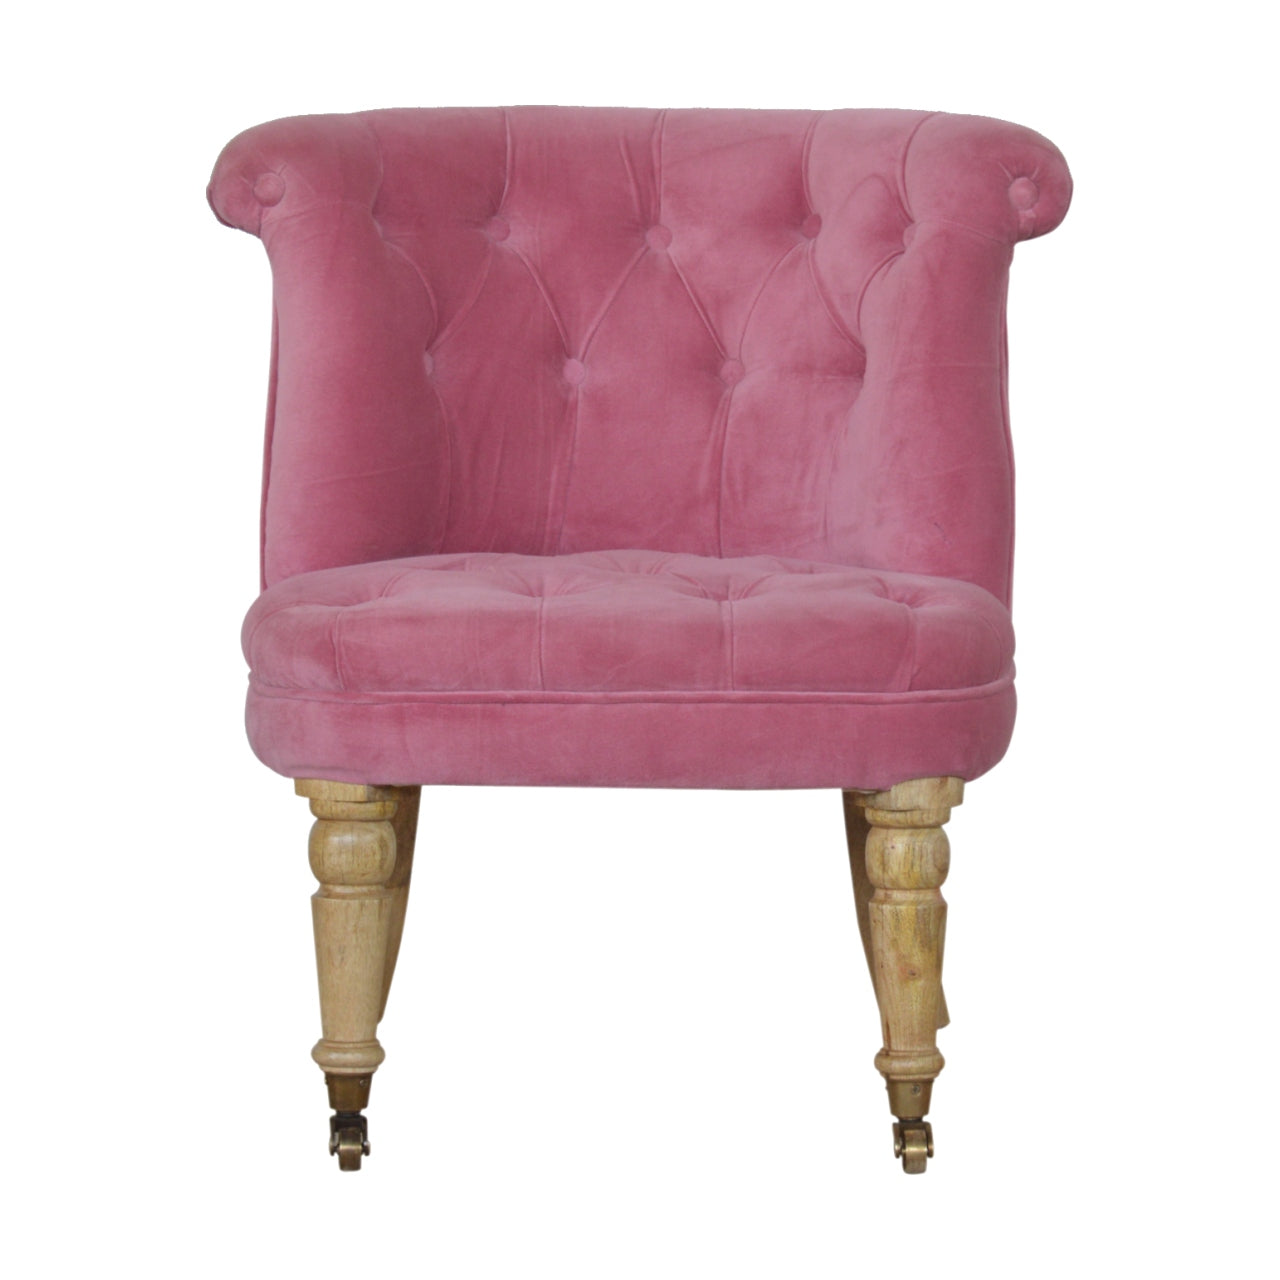 View Pink Velvet Accent Chair information